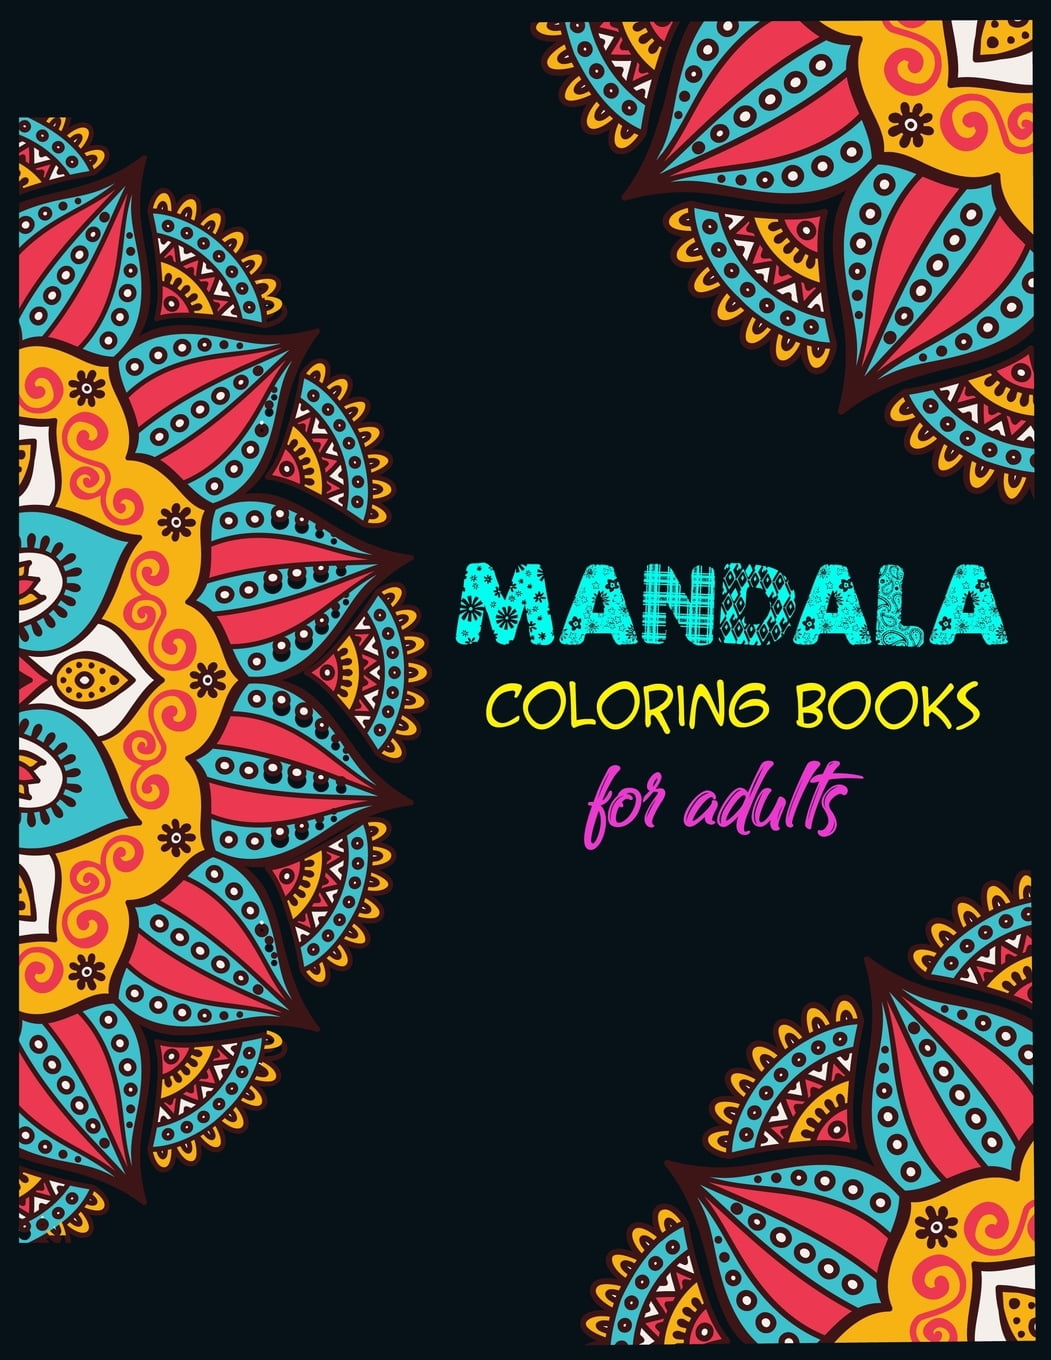 Download Mandala Coloring Books For Adults: Mandala Coloring Books, Mandala Sketchbook, Templates For ...